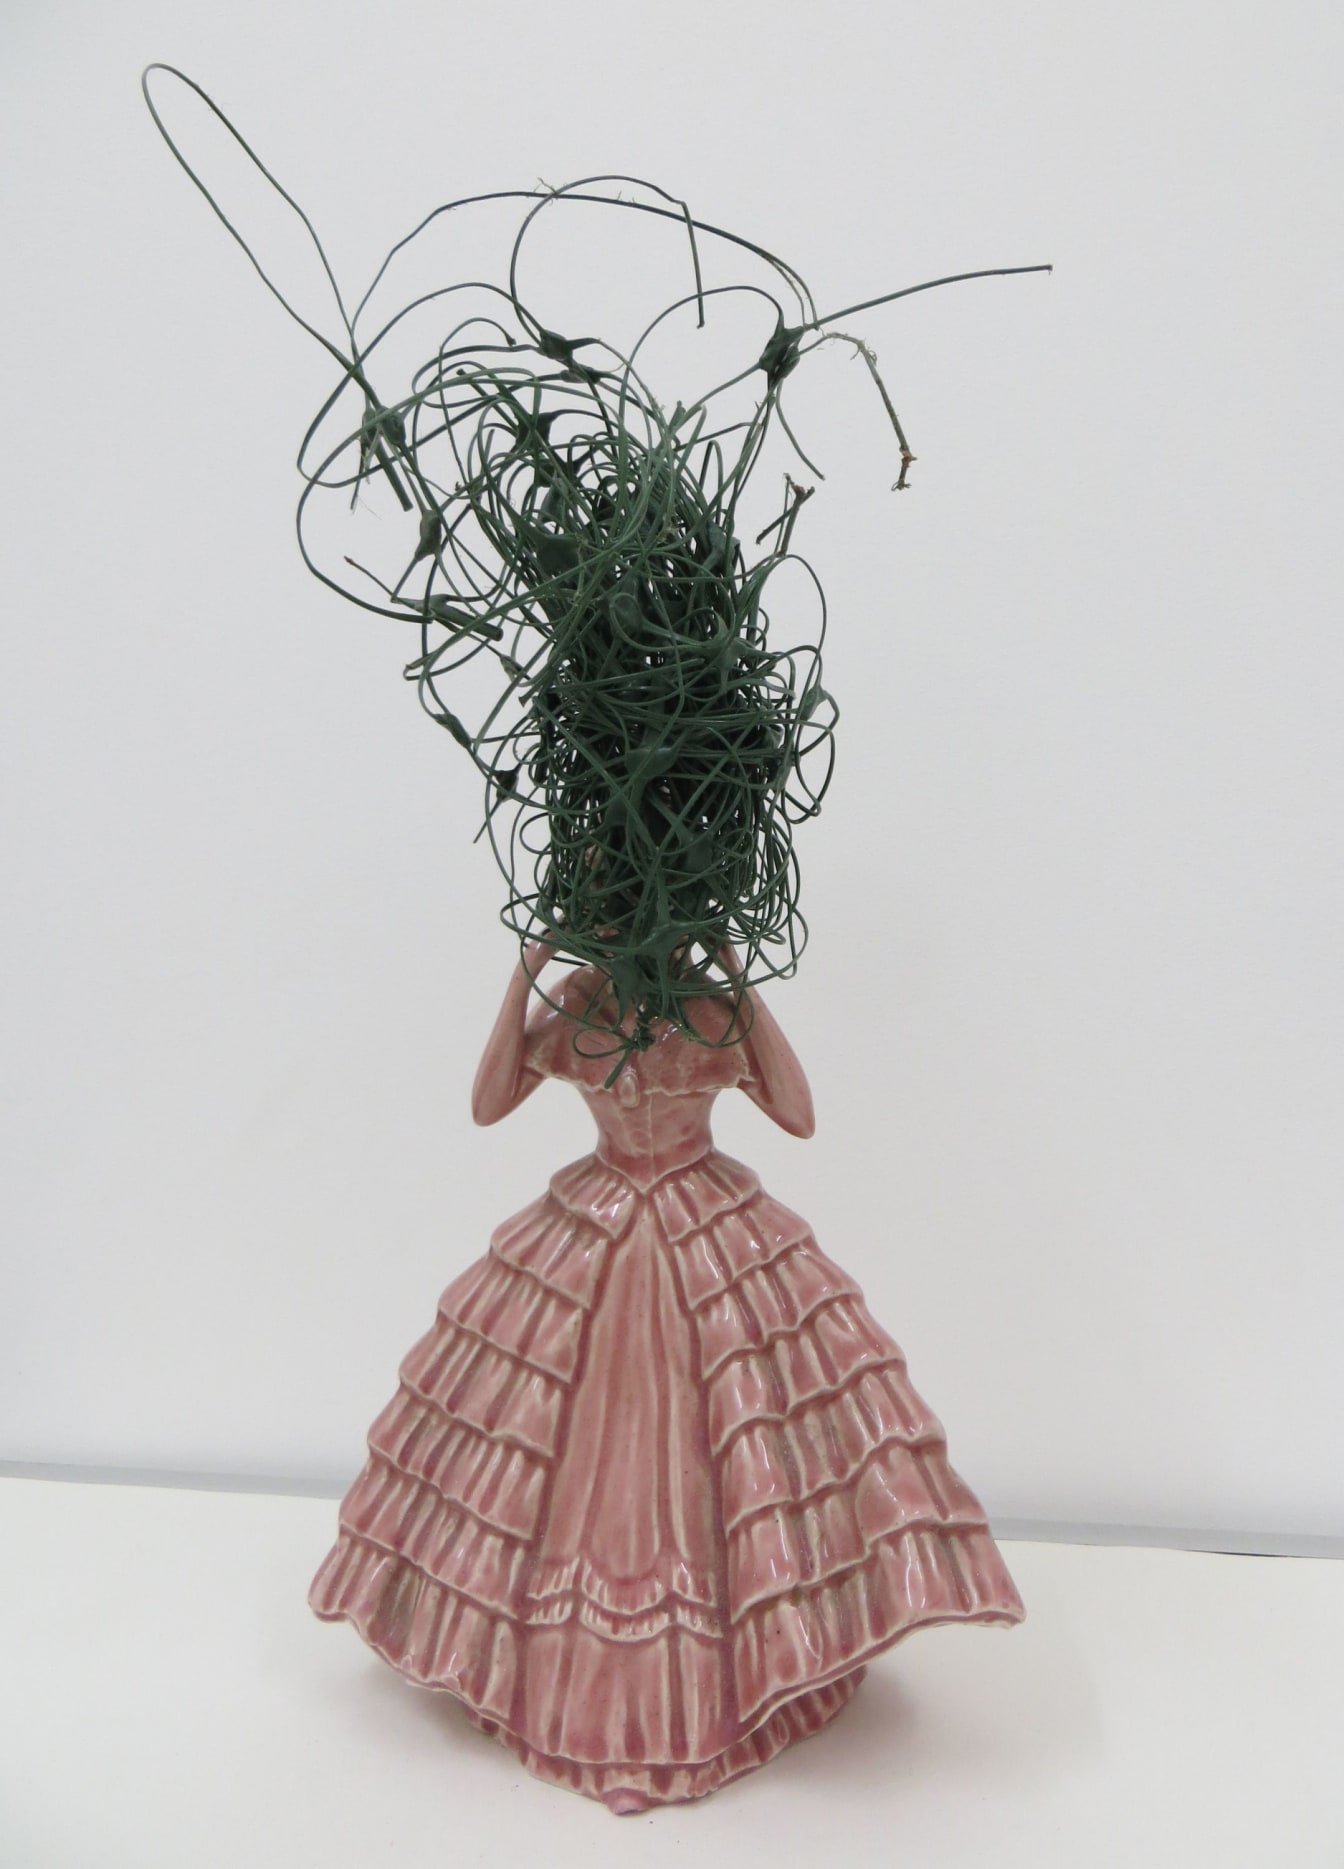 Kate Murdoch - Bad Head Day - Ceramic and plastic wire - 10x20x8